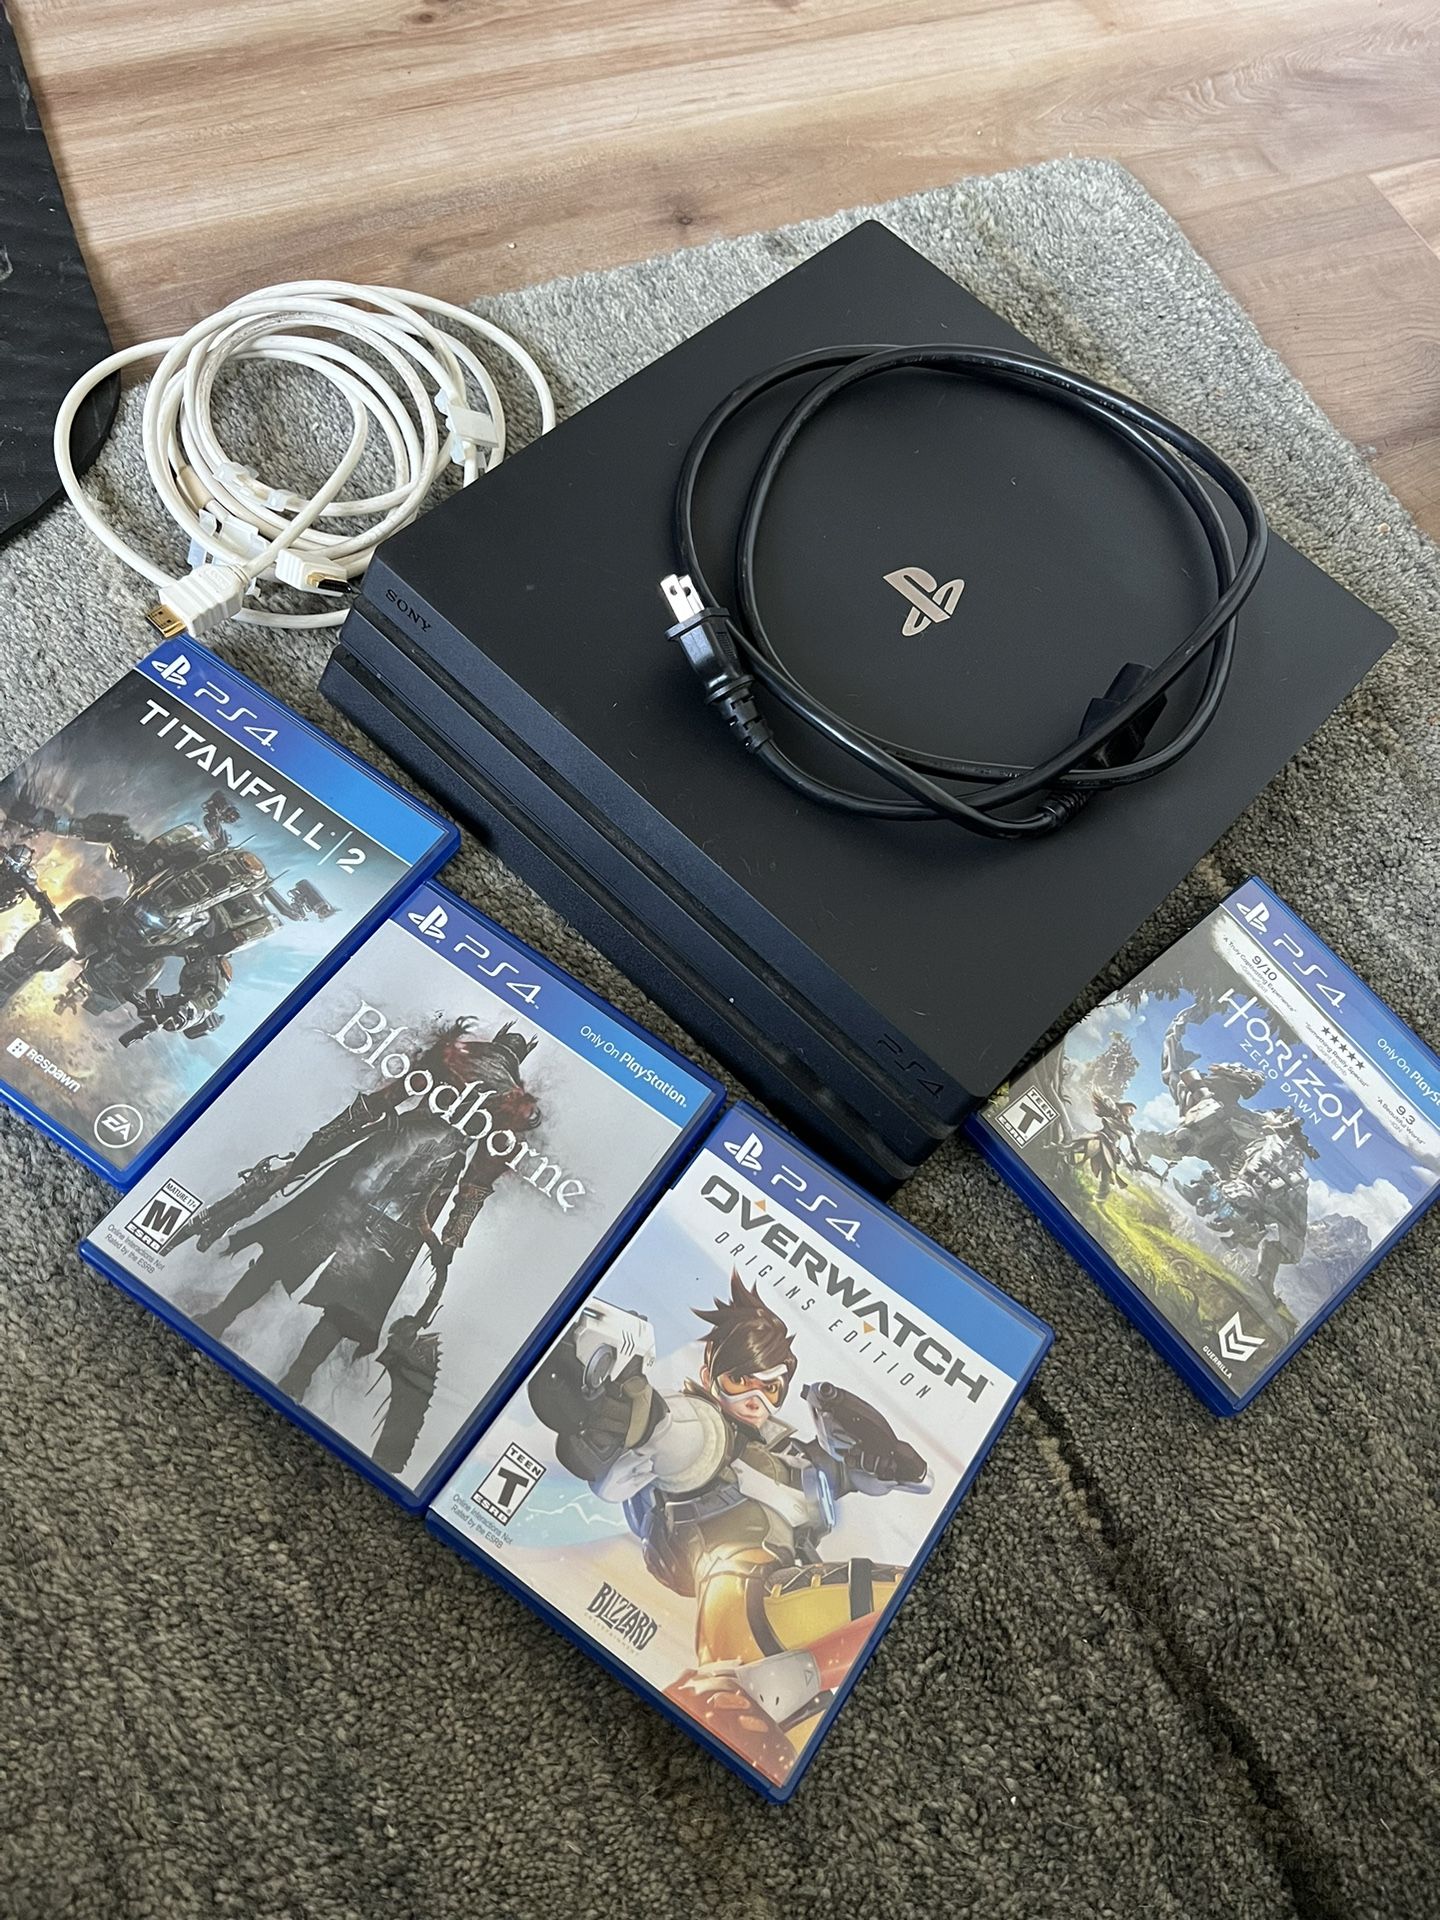 PS4 Pro Console, Cables, 4 Free Games. No Controller